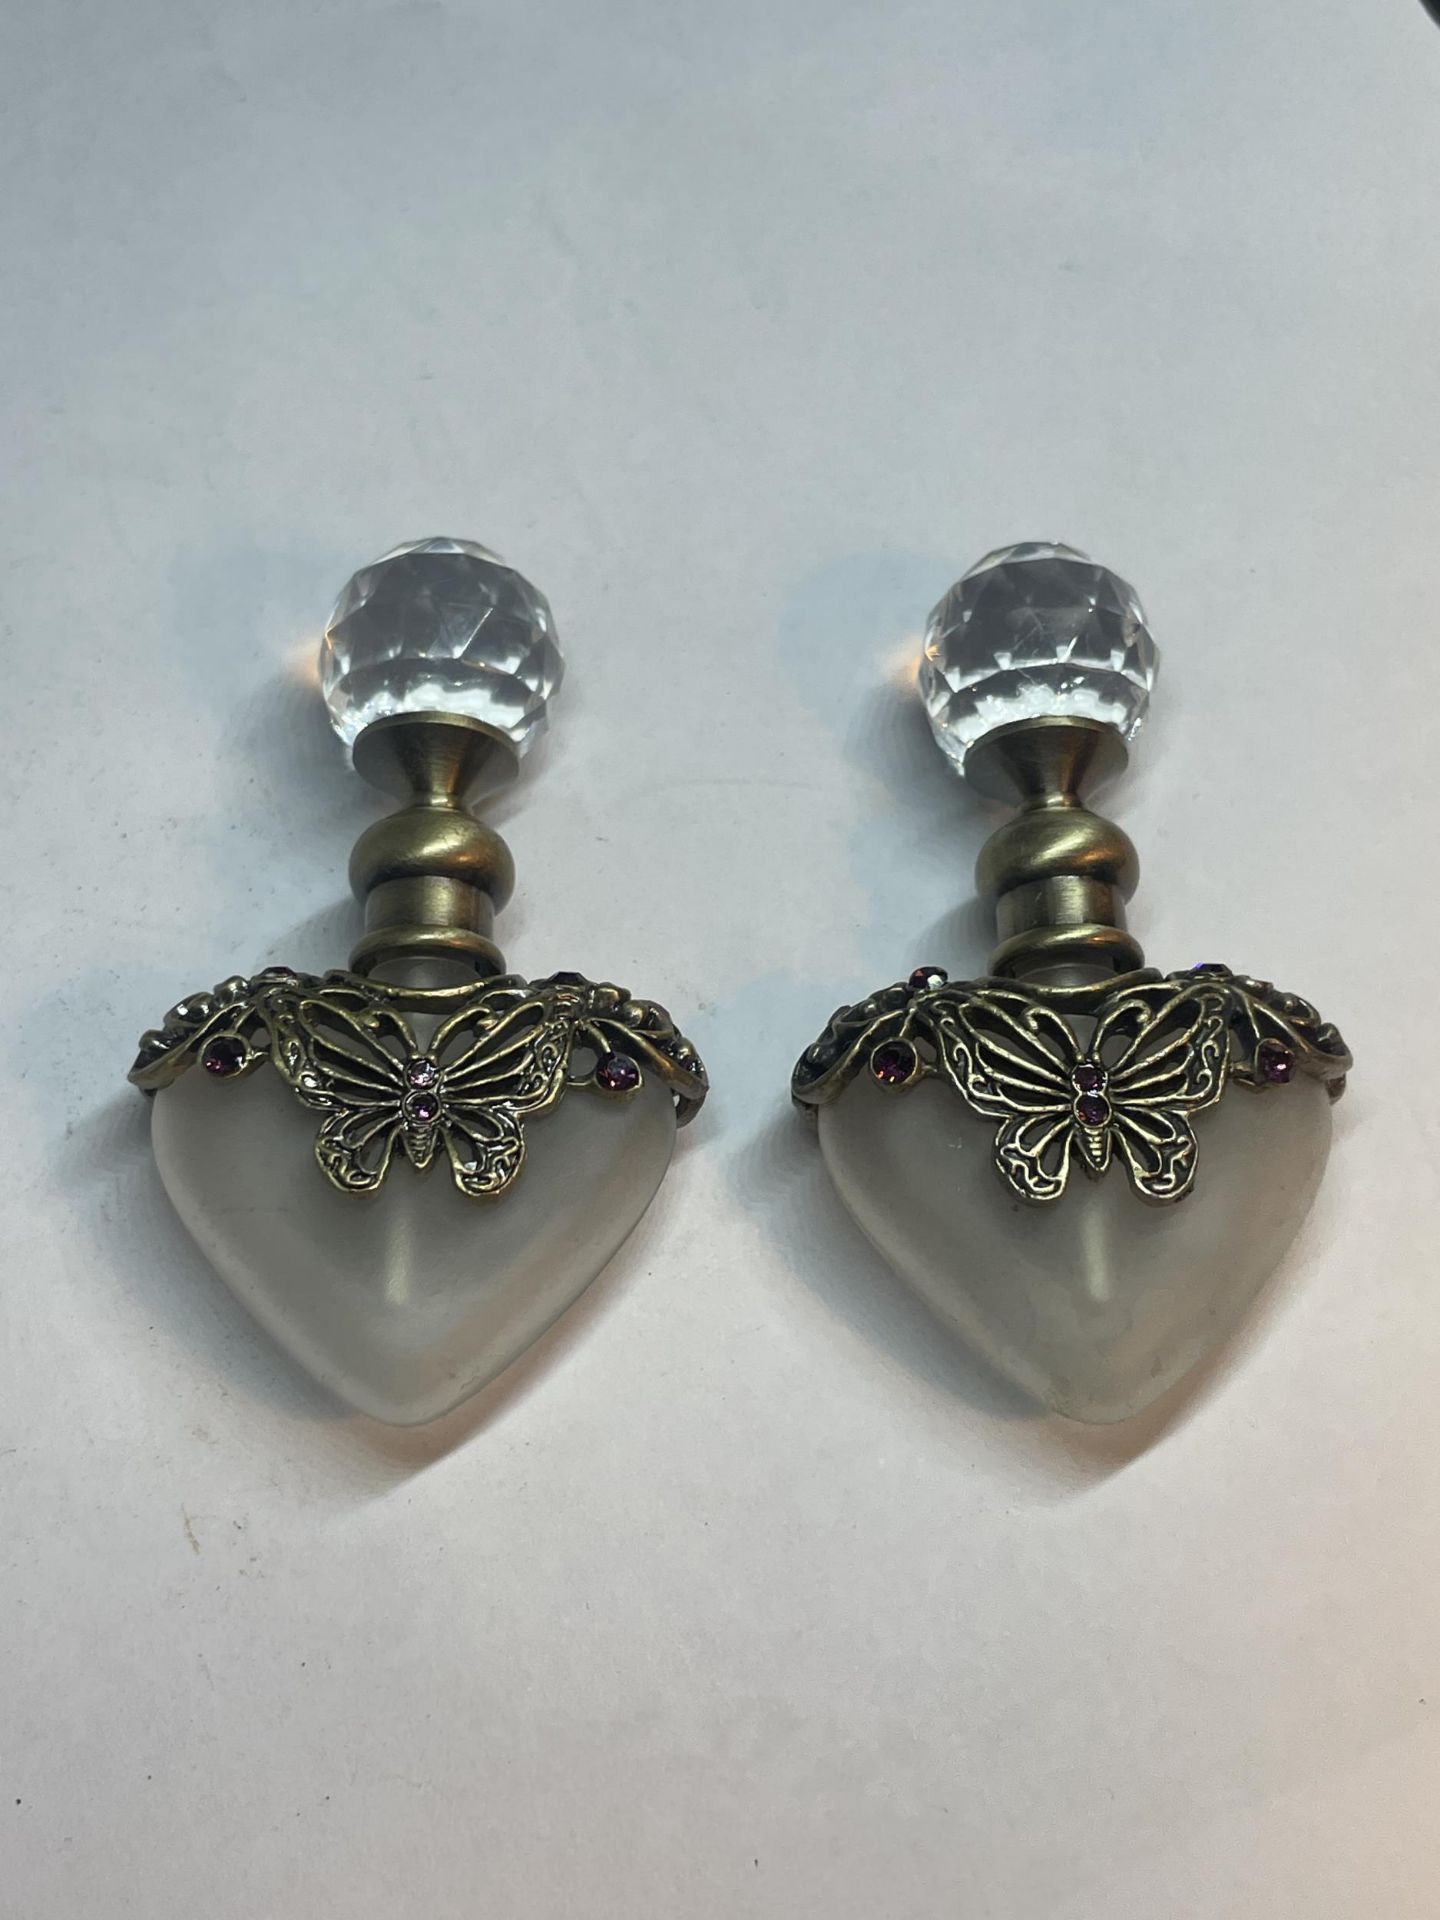 TWO GLASS PERFUME BOTTLES WITH METAL BUTTERFLY DESIGN